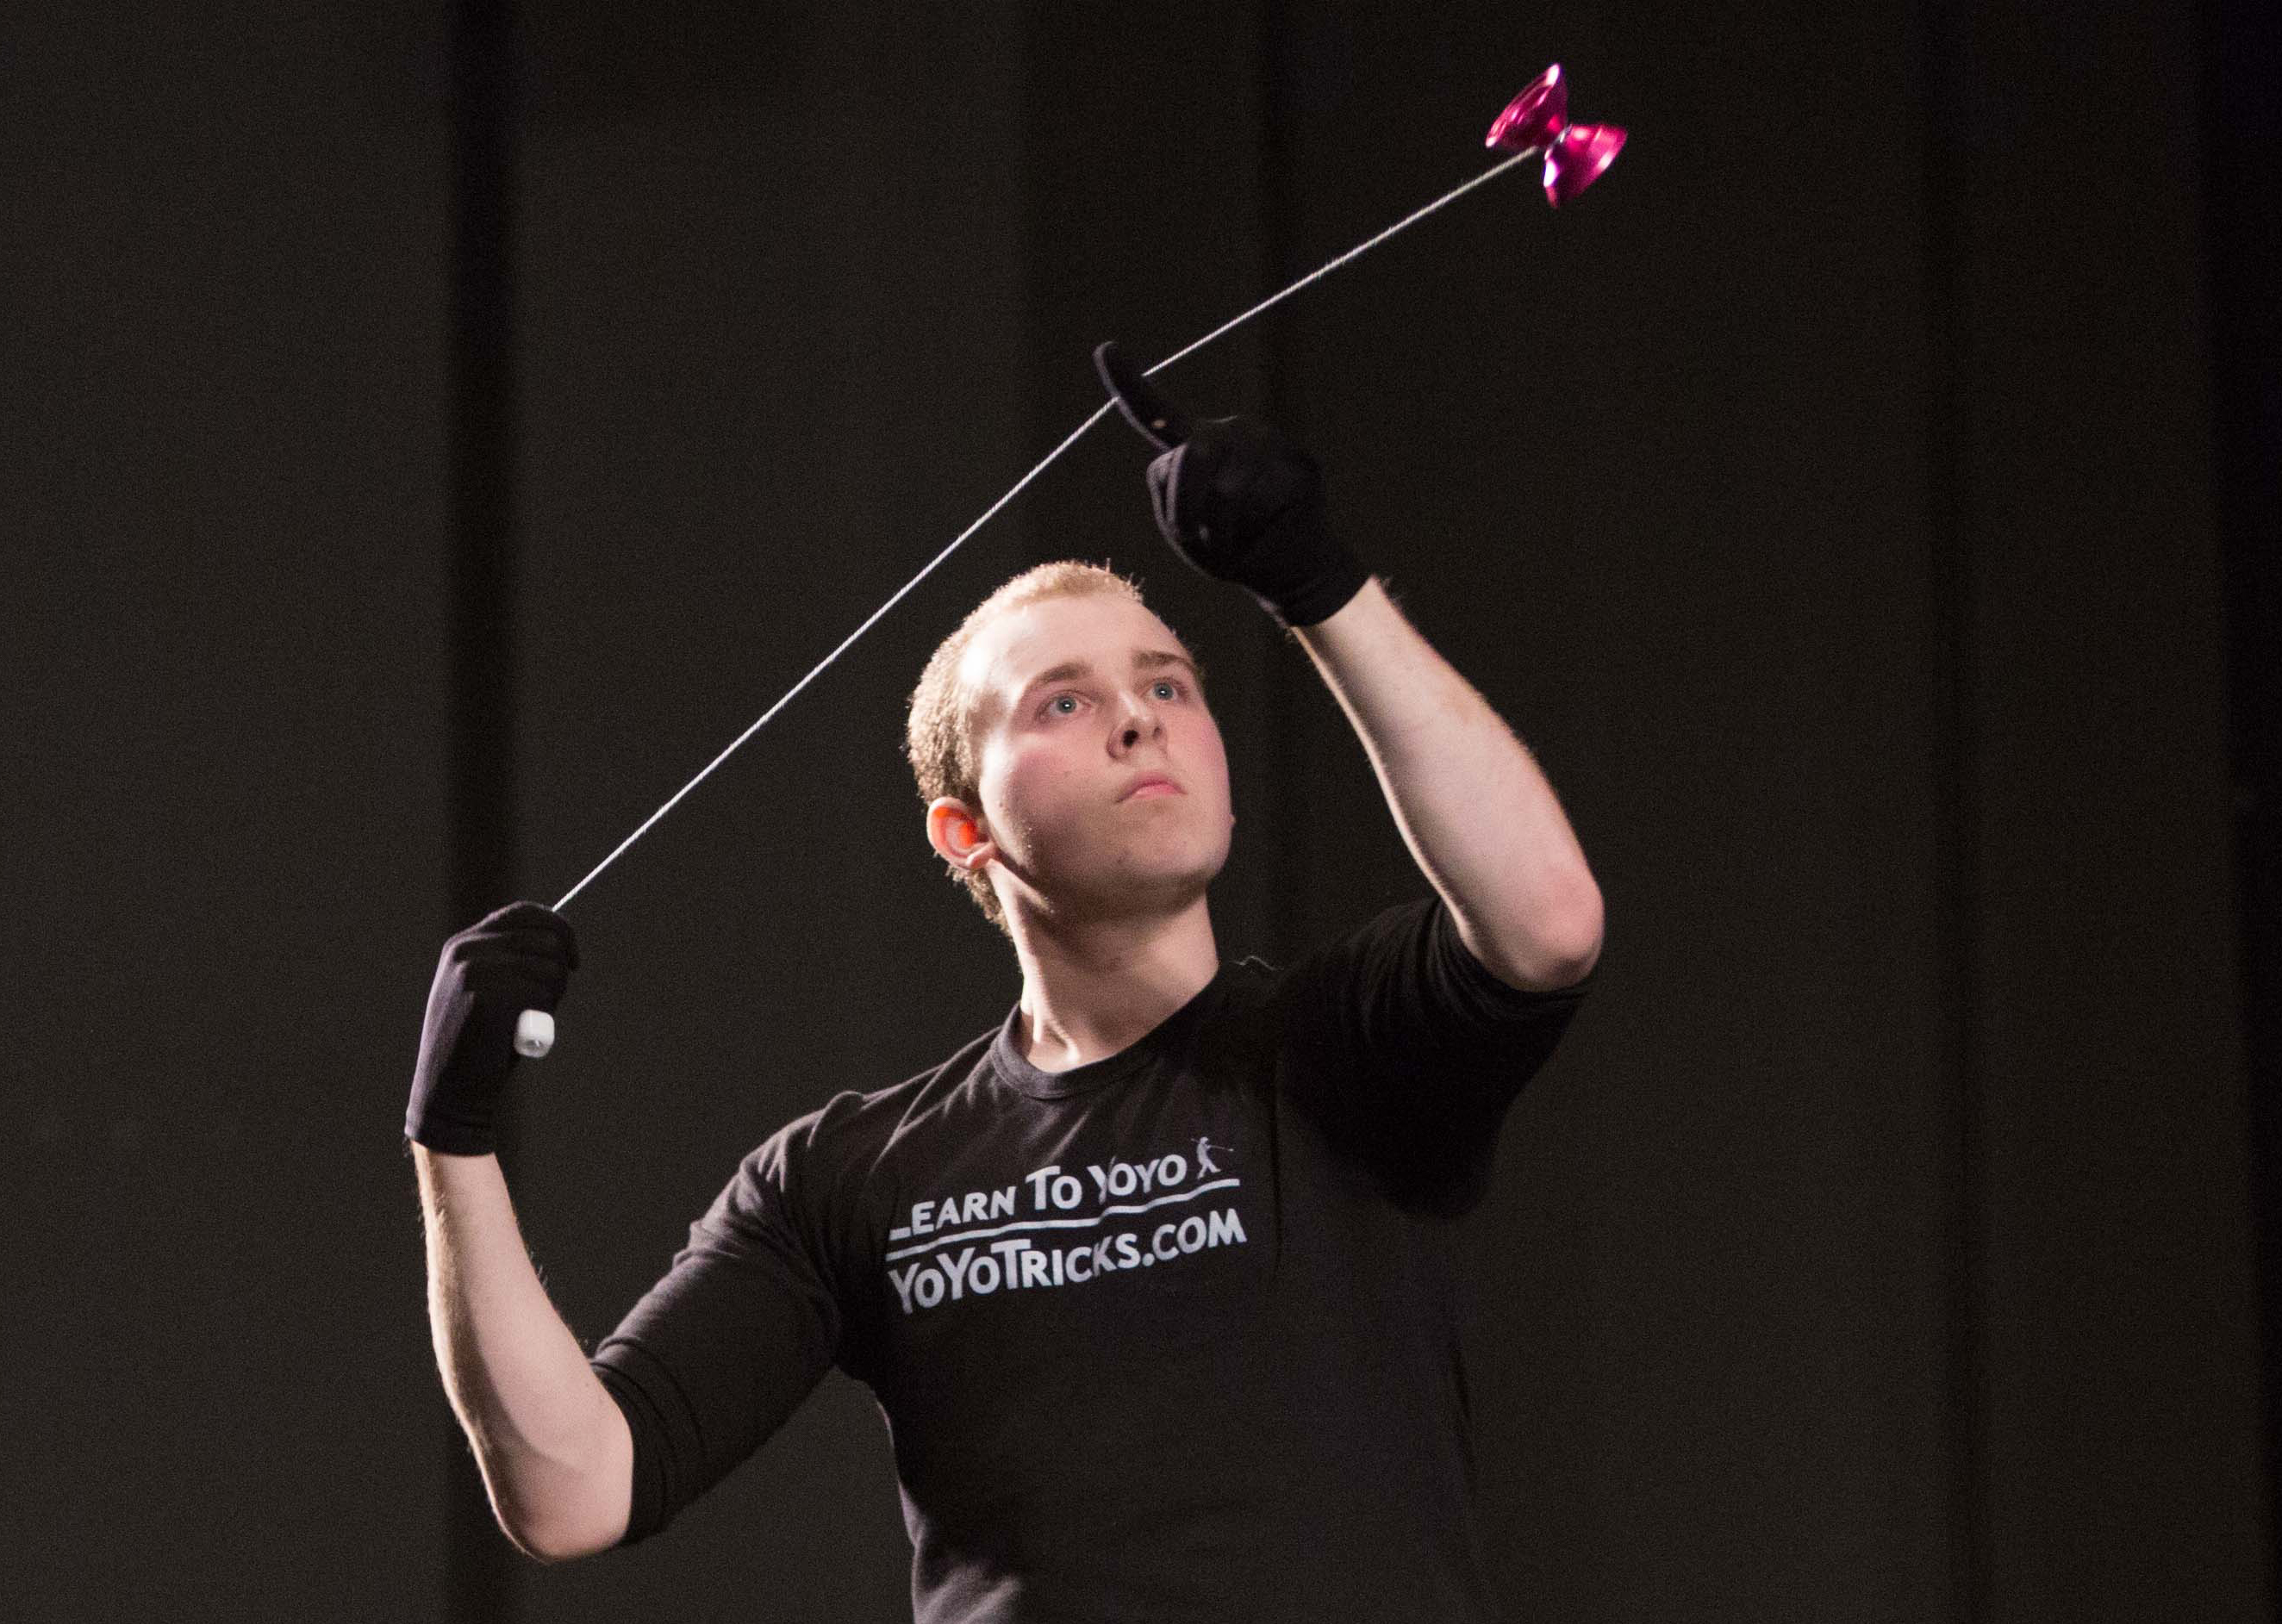 US Player Wins World Yoyo Contest with Crazy “OffHand” Style Play